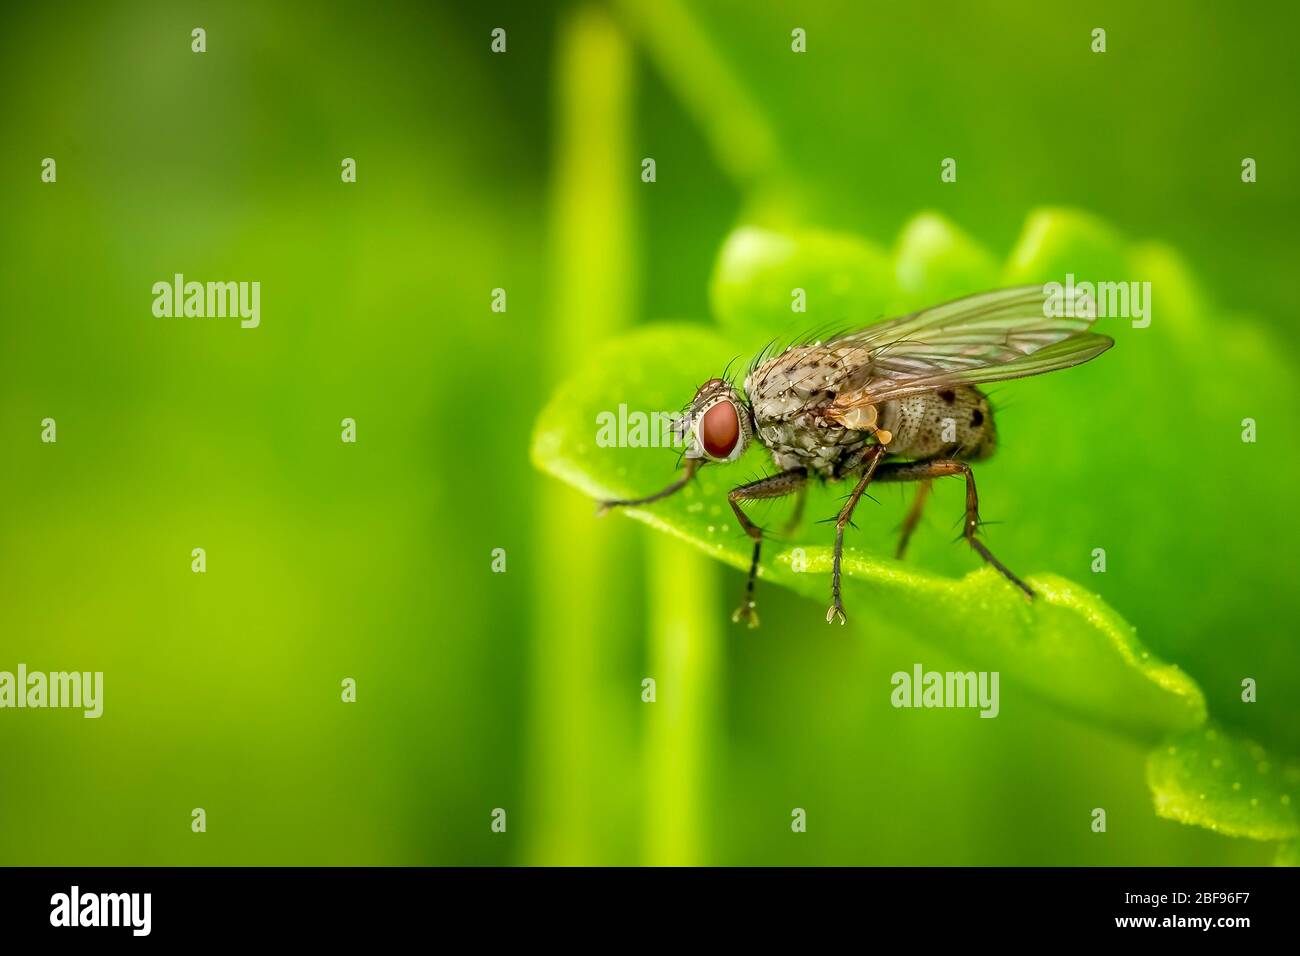 Coenosia Tigrina fly resting on a green leaf with a blurred background and lots of copy space Stock Photo